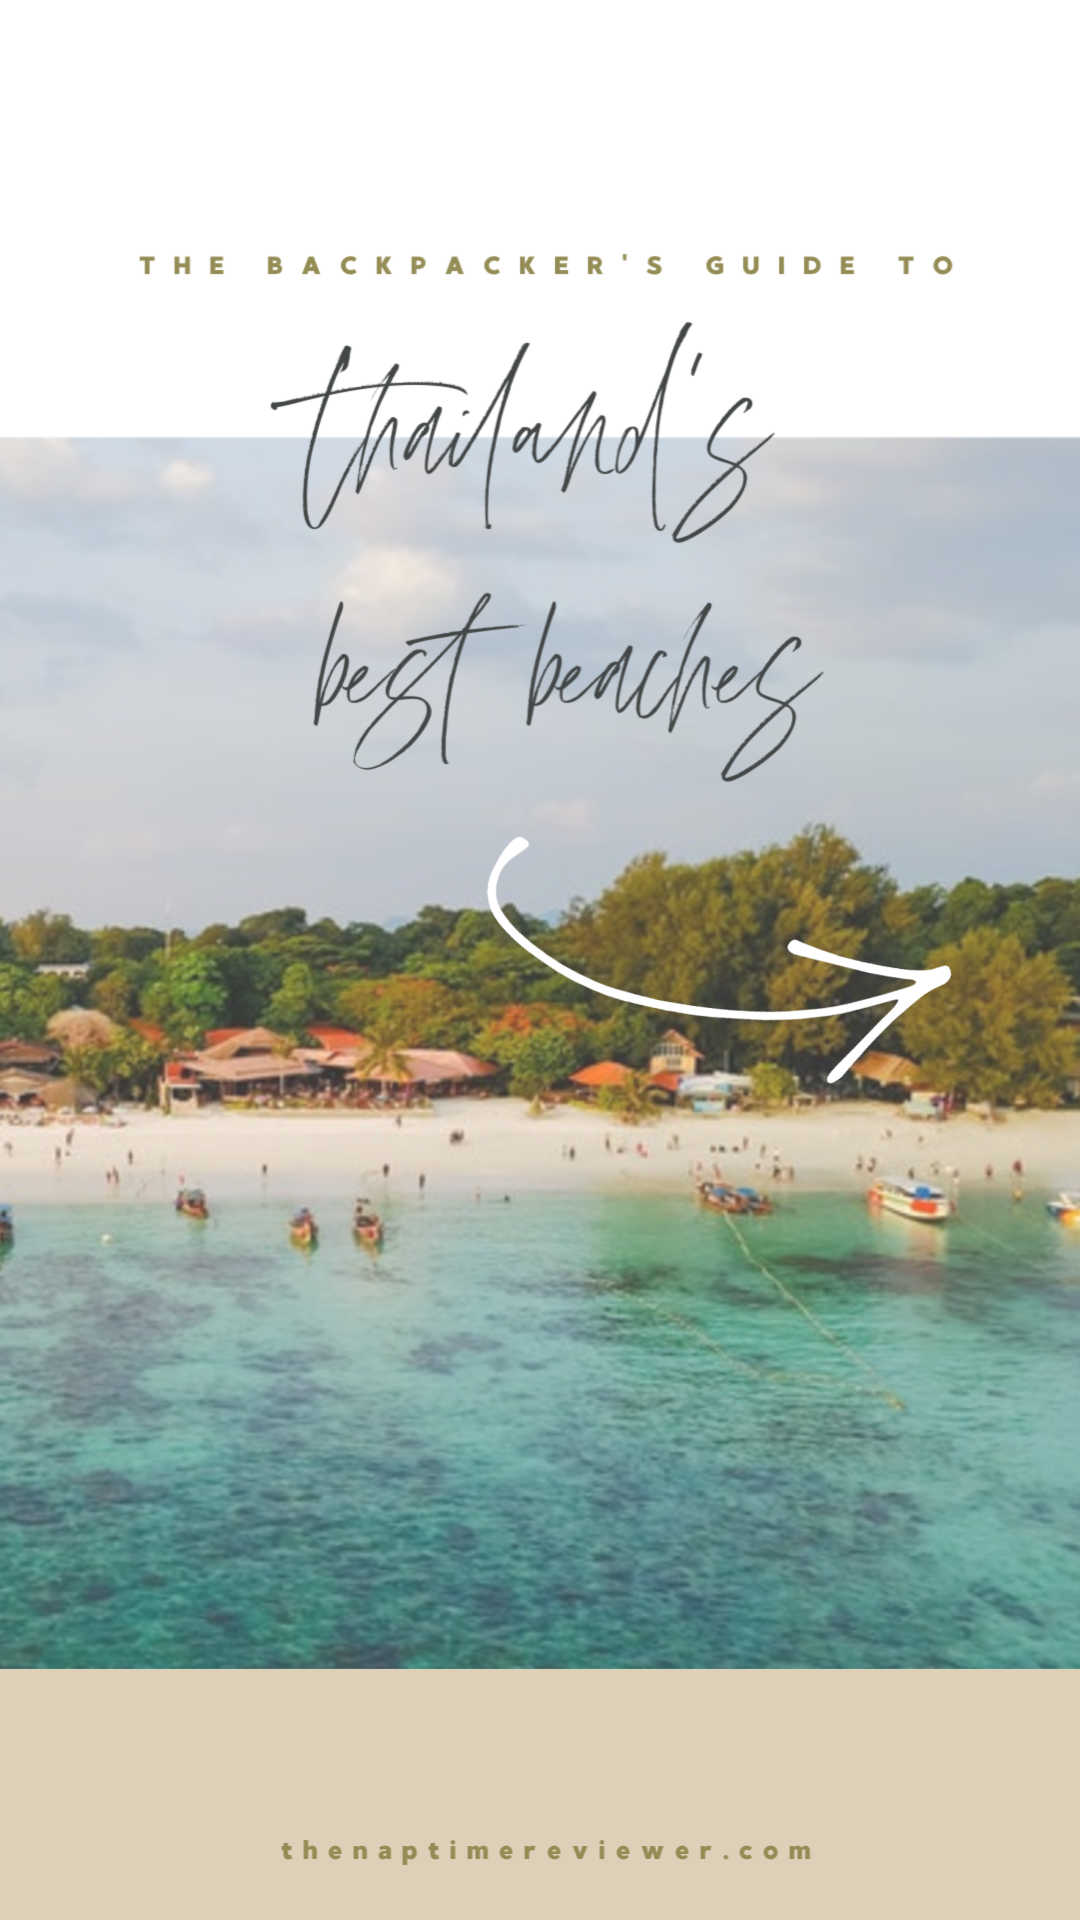 The Backpacker's Guide to Thailand's Best Beaches